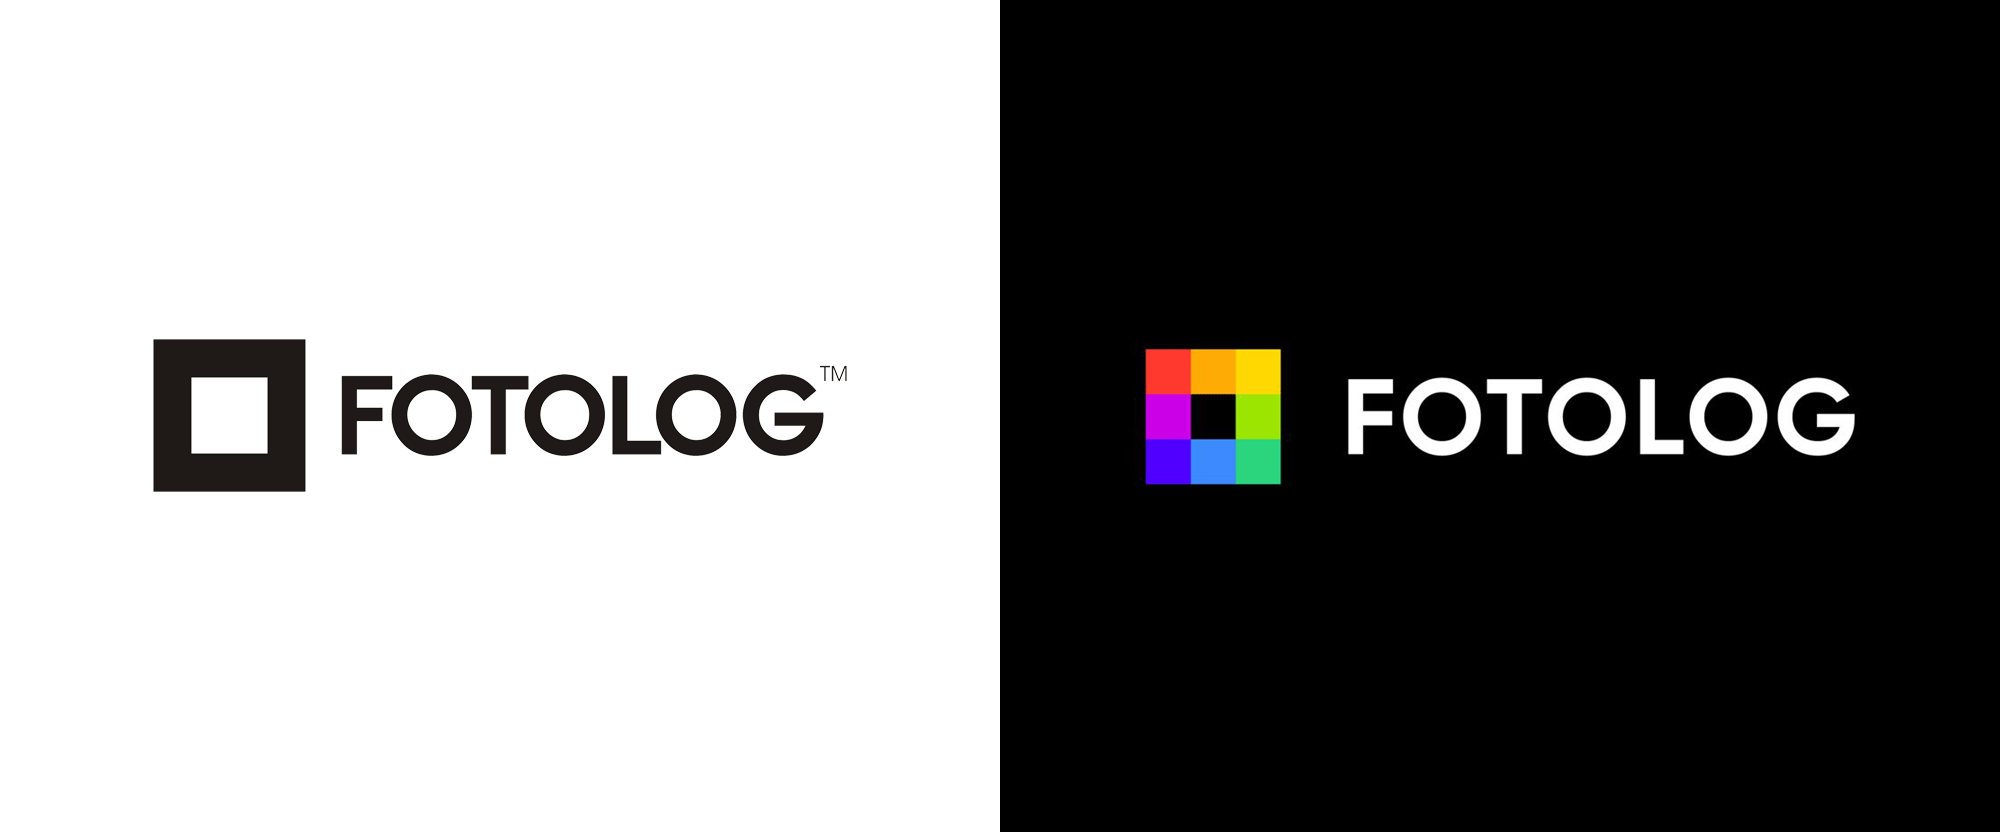 New Logo and Identity for Fotolog by Soluble Studio